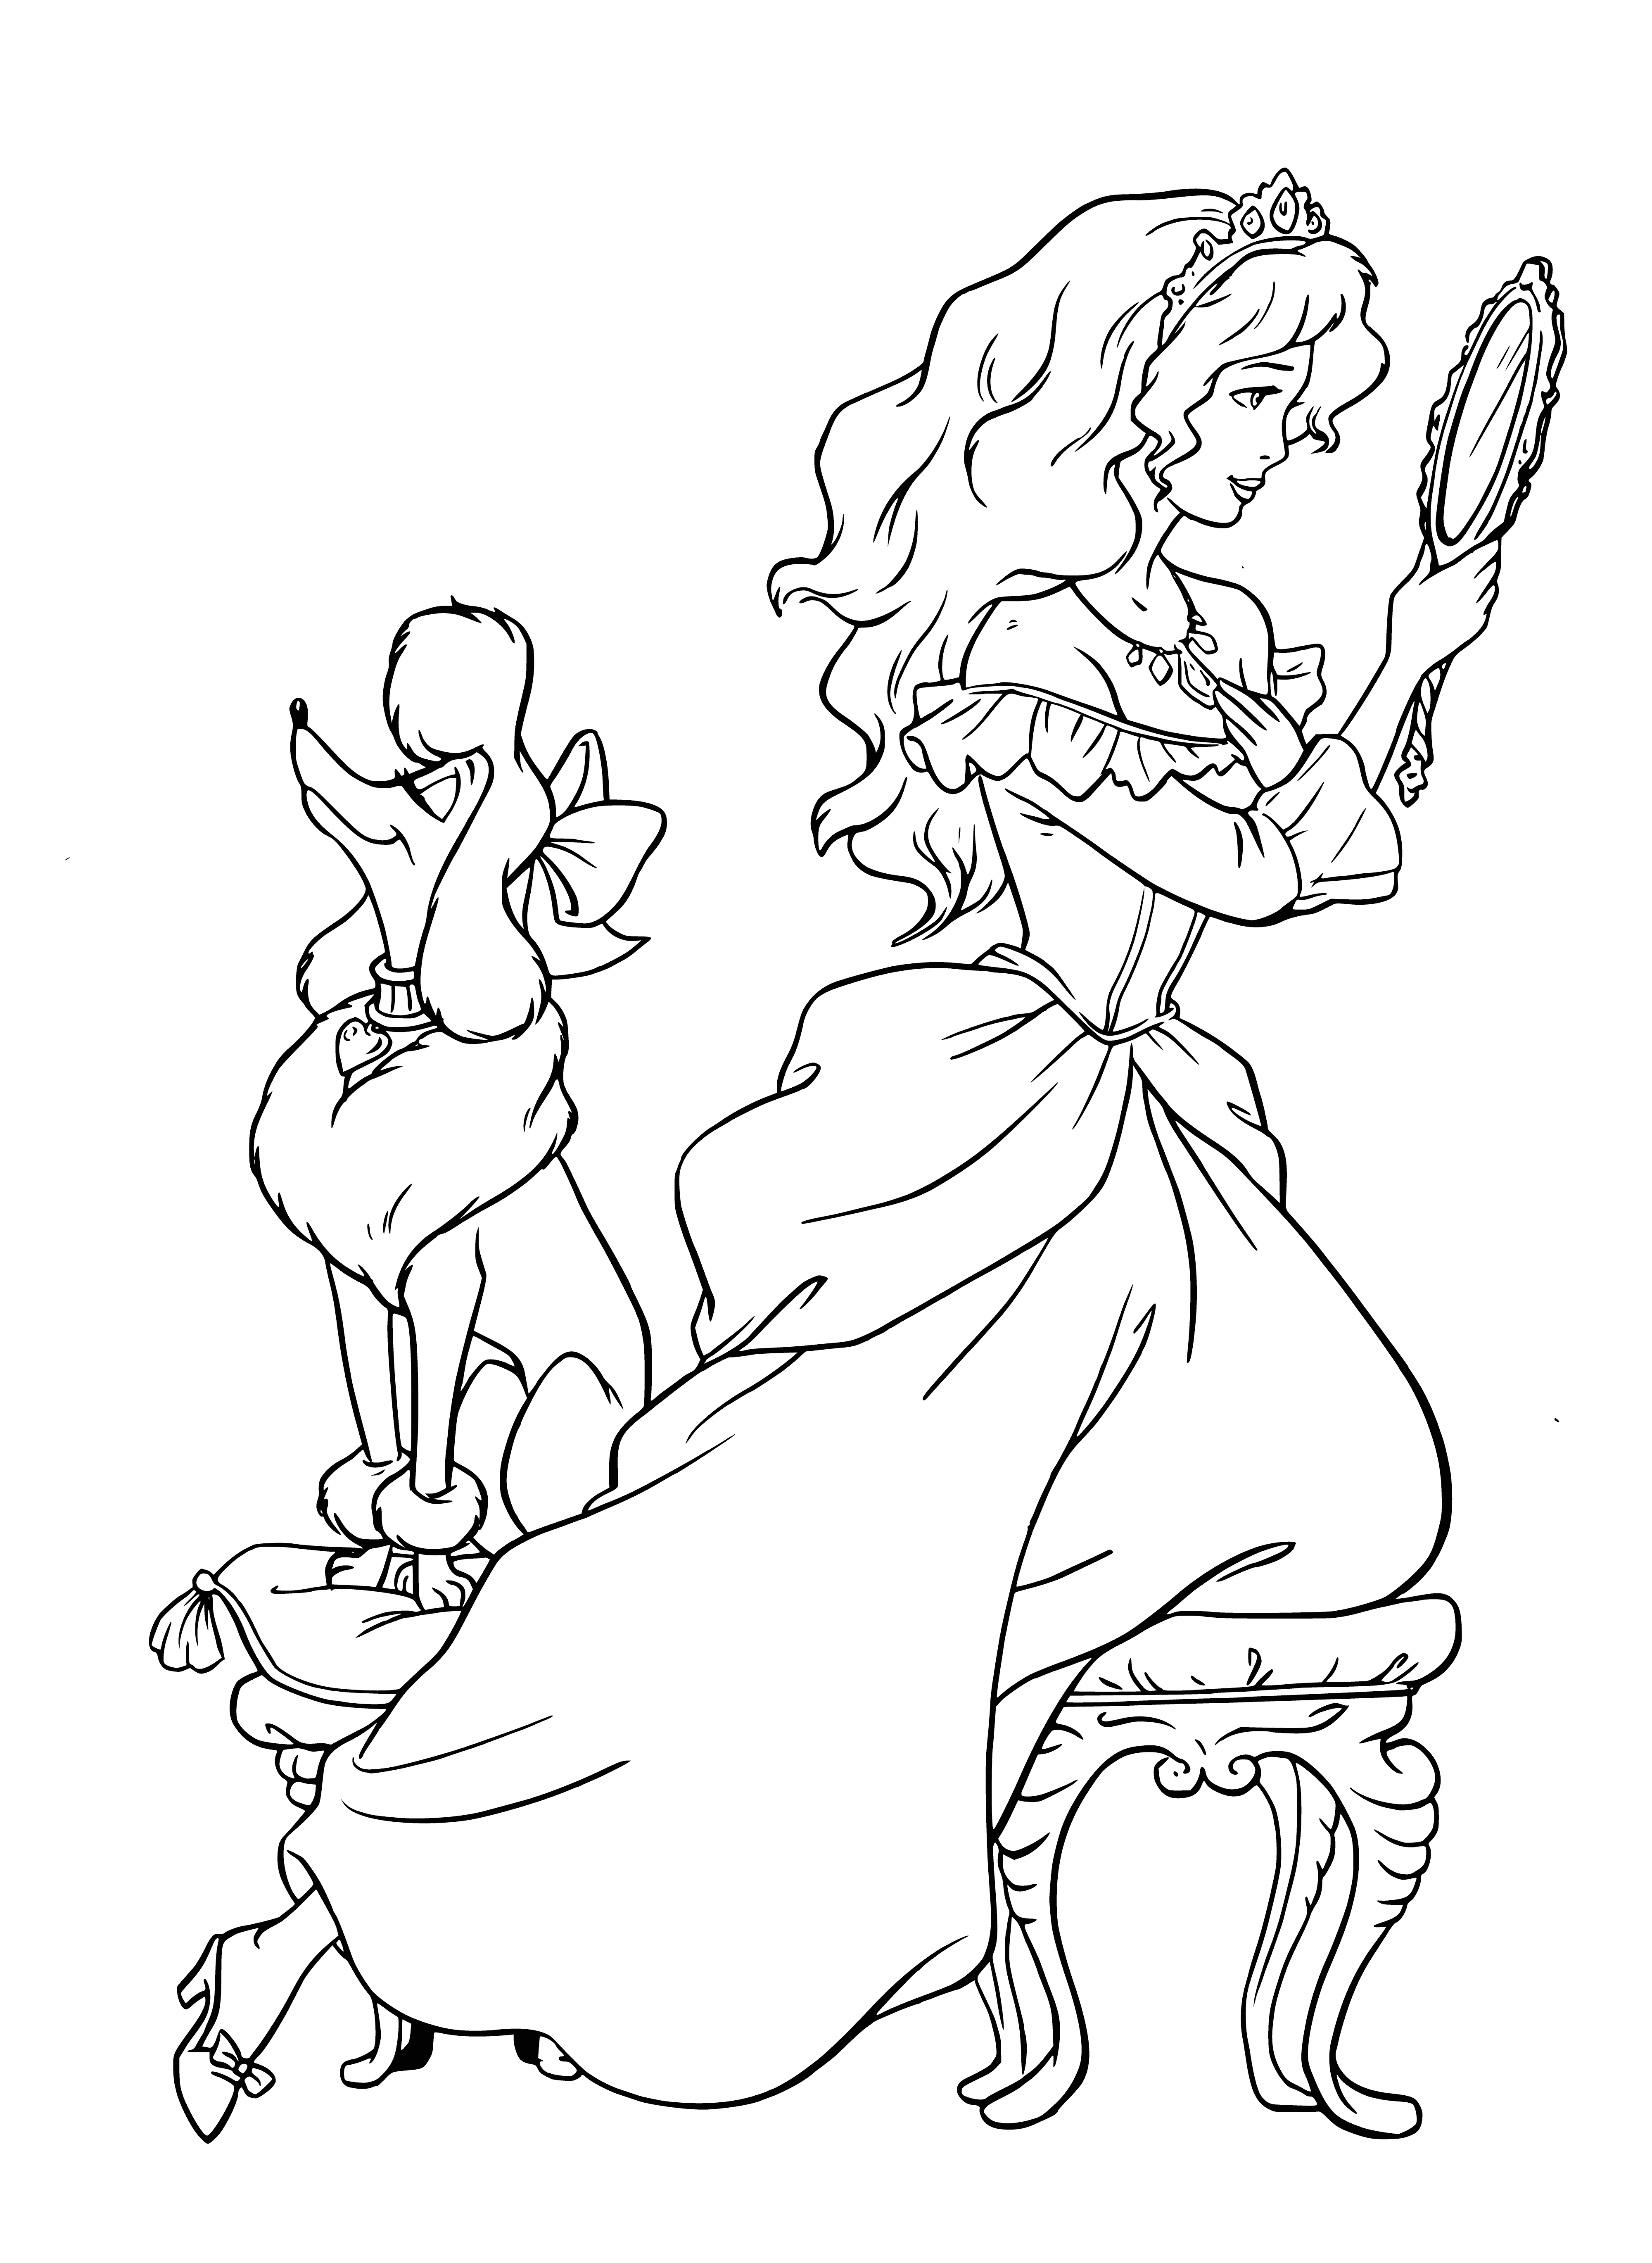 Princess with pendants coloring page